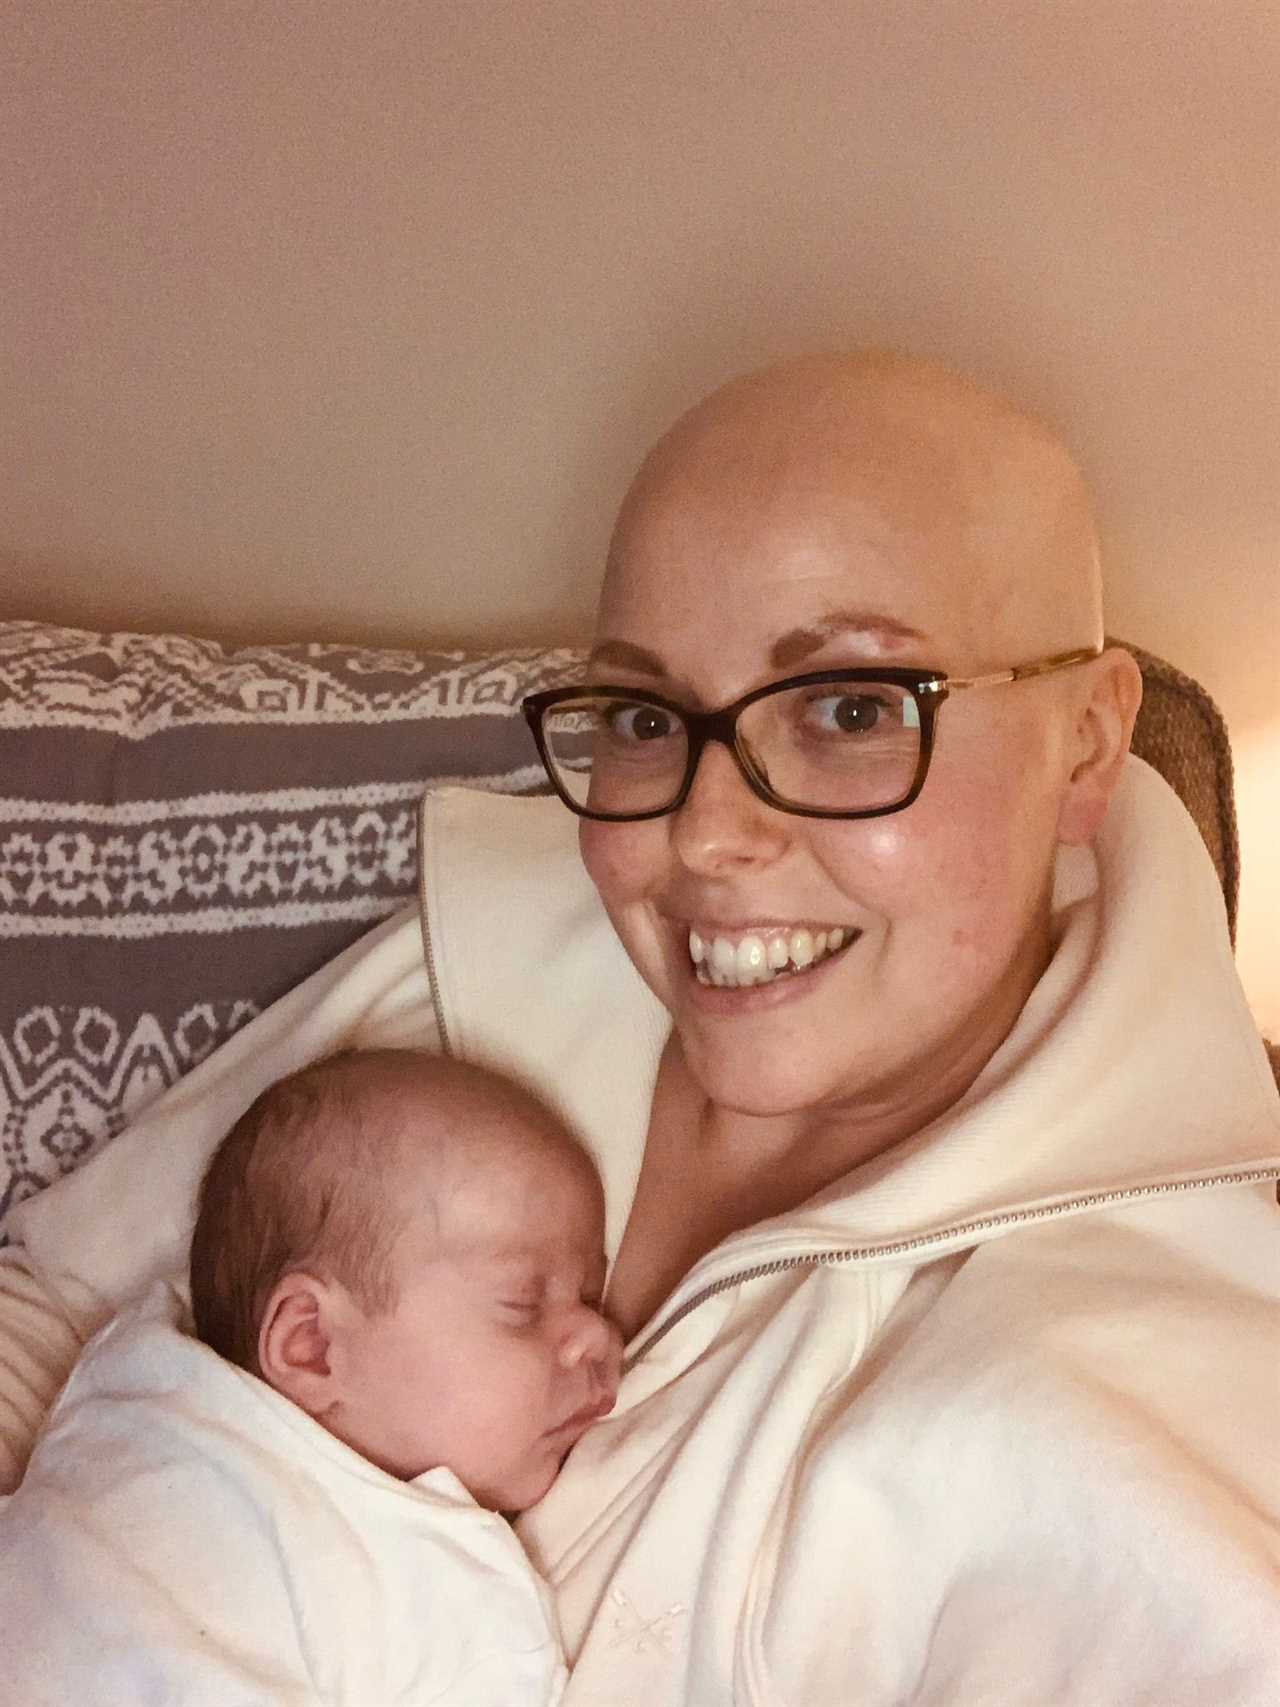 I was diagnosed with cancer when I was pregnant – I had to go through chemo before birth & am desperate for miracle drug